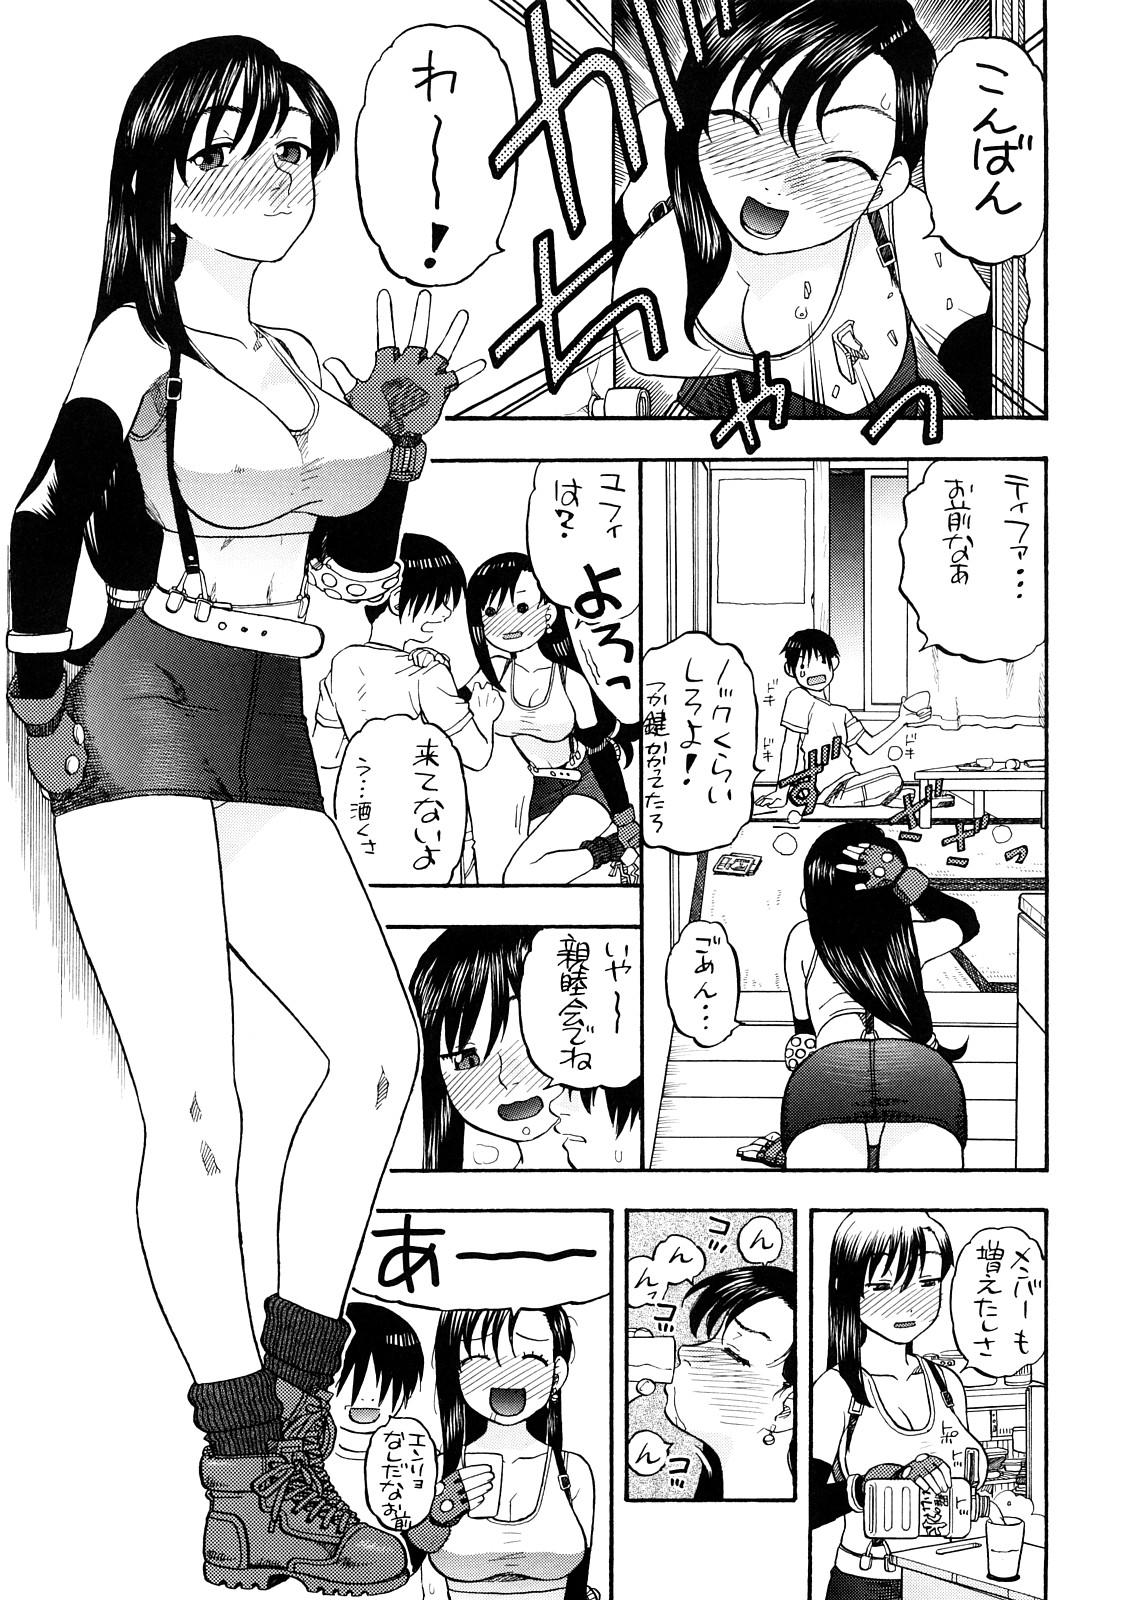 Tifa to Yuffie to Yojouhan 3